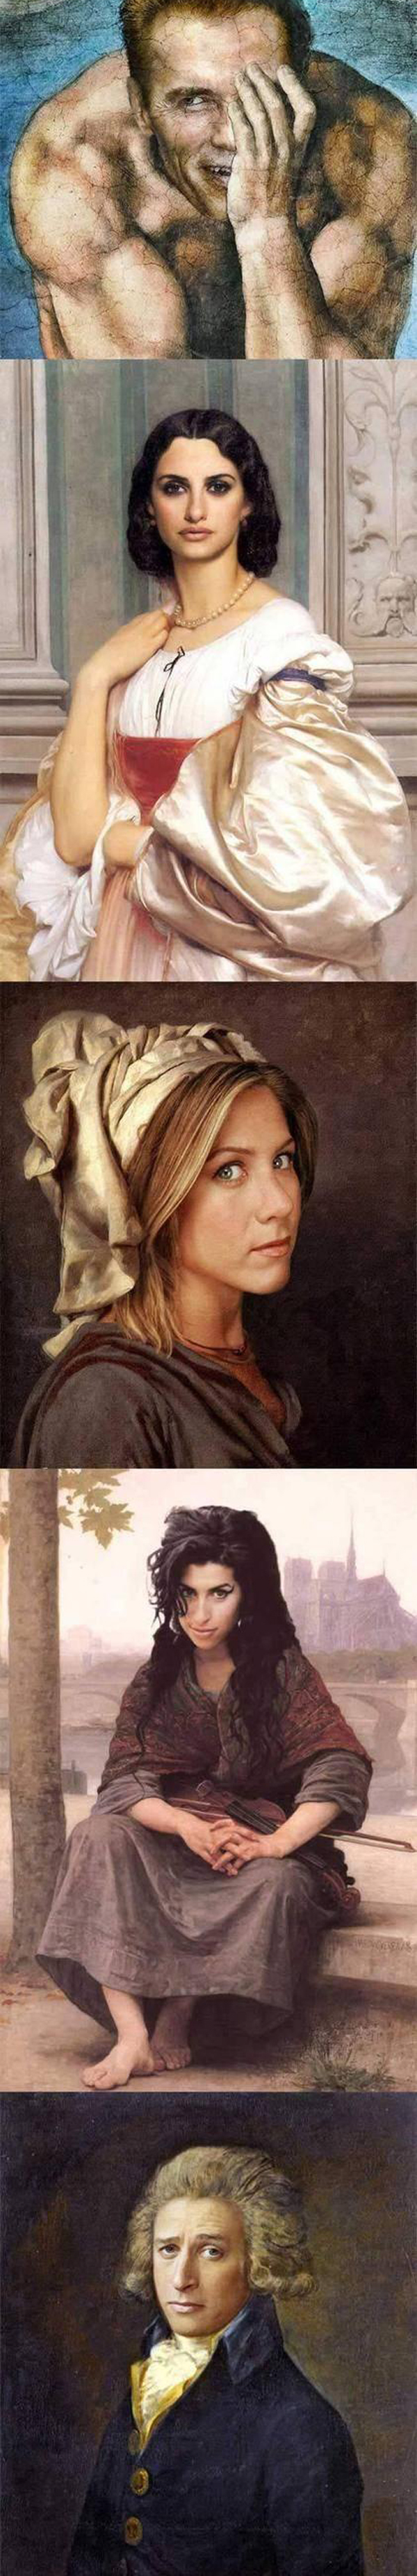 famous paintings with celebs